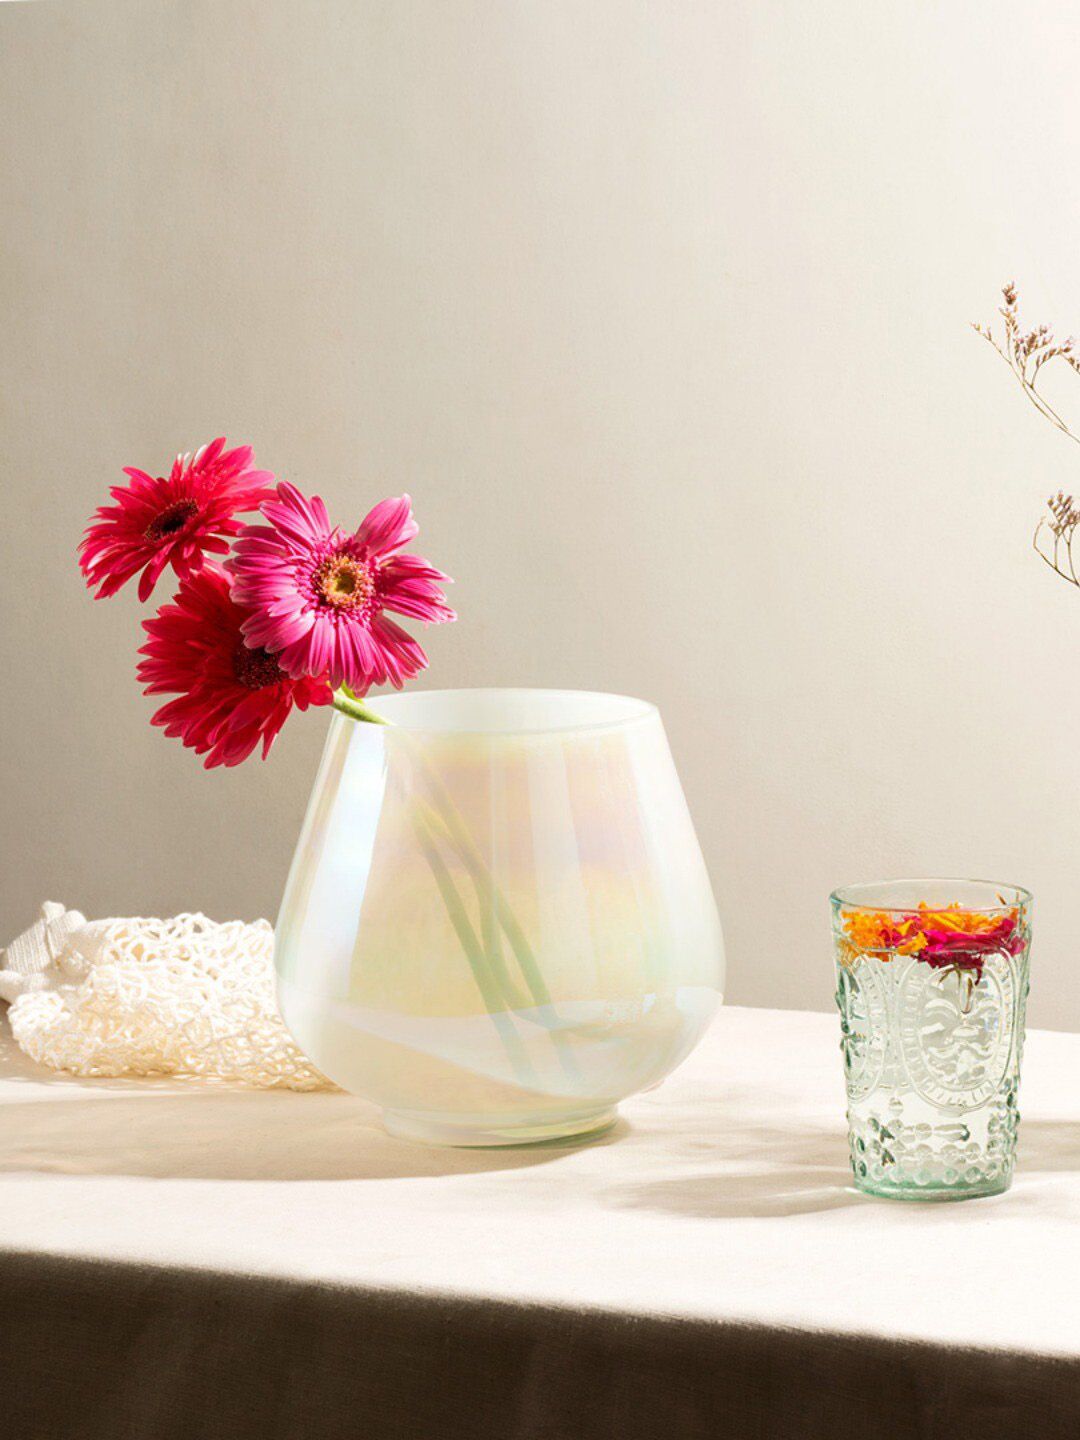 The 7 DeKor Solid Glass Vases Price in India